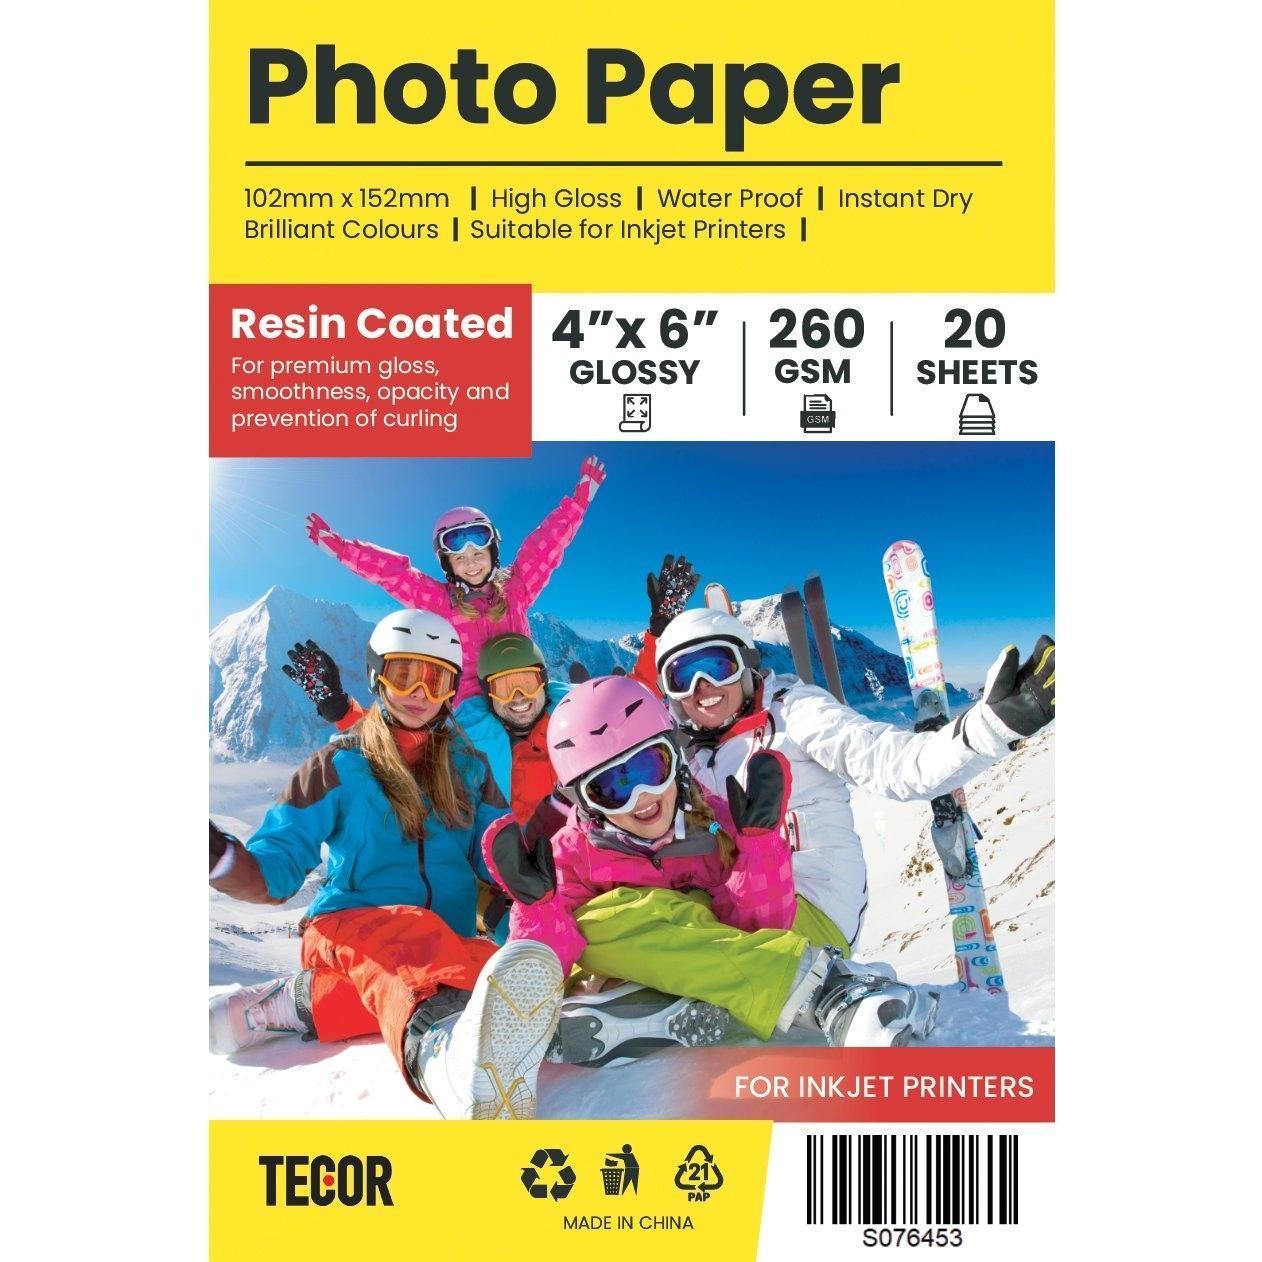 5 x Photographic Quality Resin Coated Premium Glossy Photo Paper 260GSM 4 x 6 inches for Inkjet Printers - 20 sheets per pack (100 sheets in total)